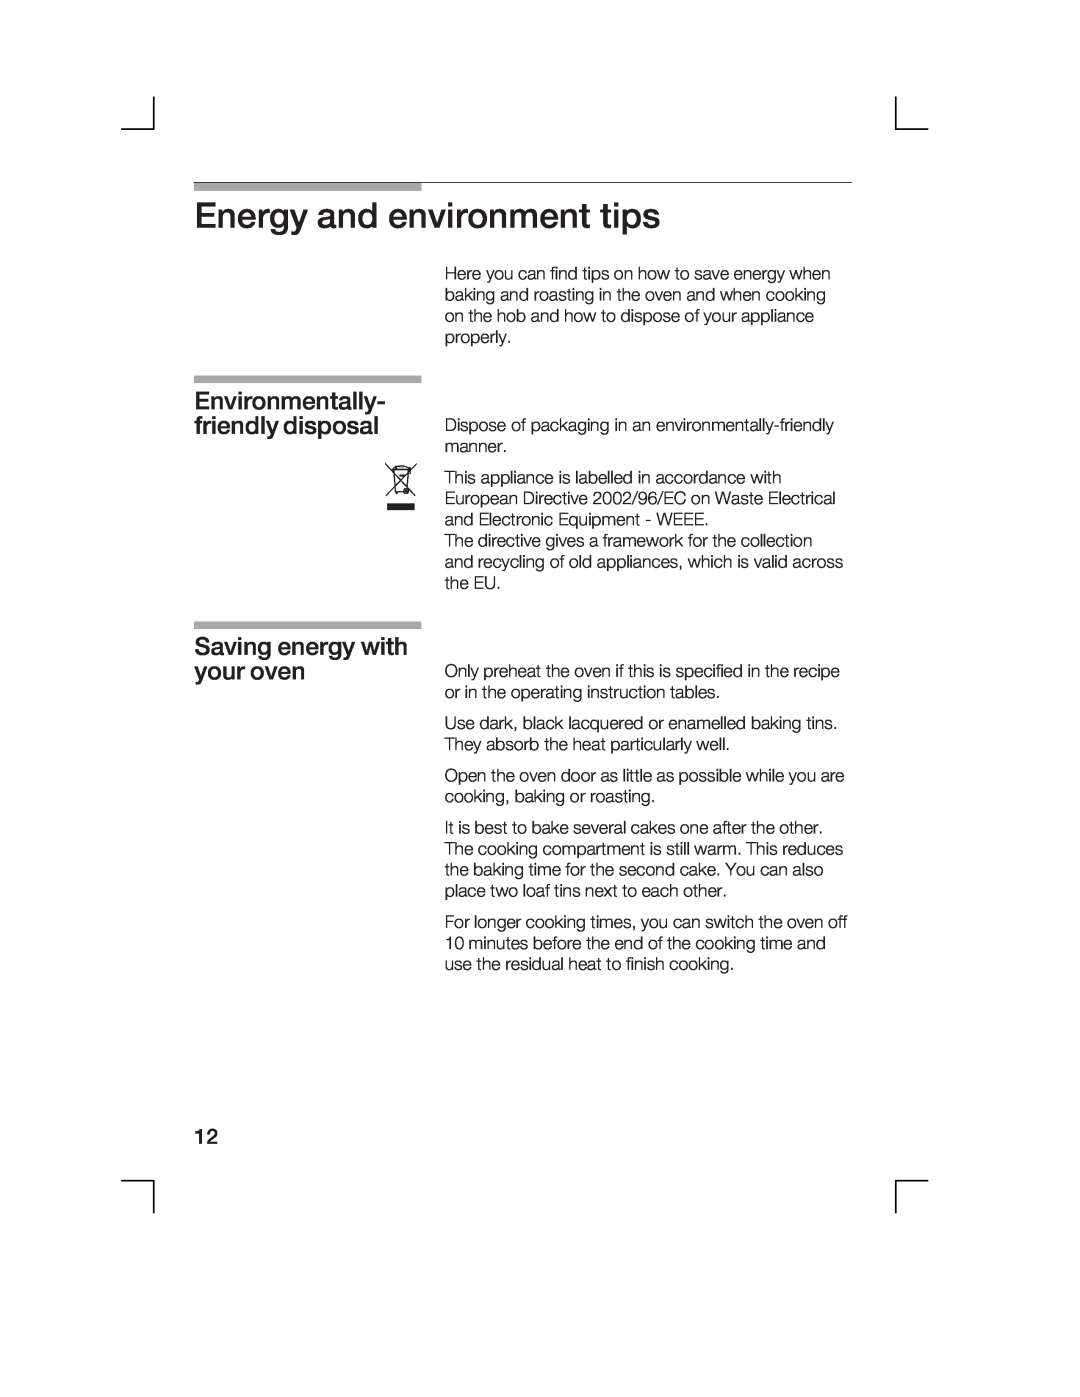 Bosch Appliances HCE744250R Energy and environment tips, Environmentally friendly disposal, Saving energy with your oven 